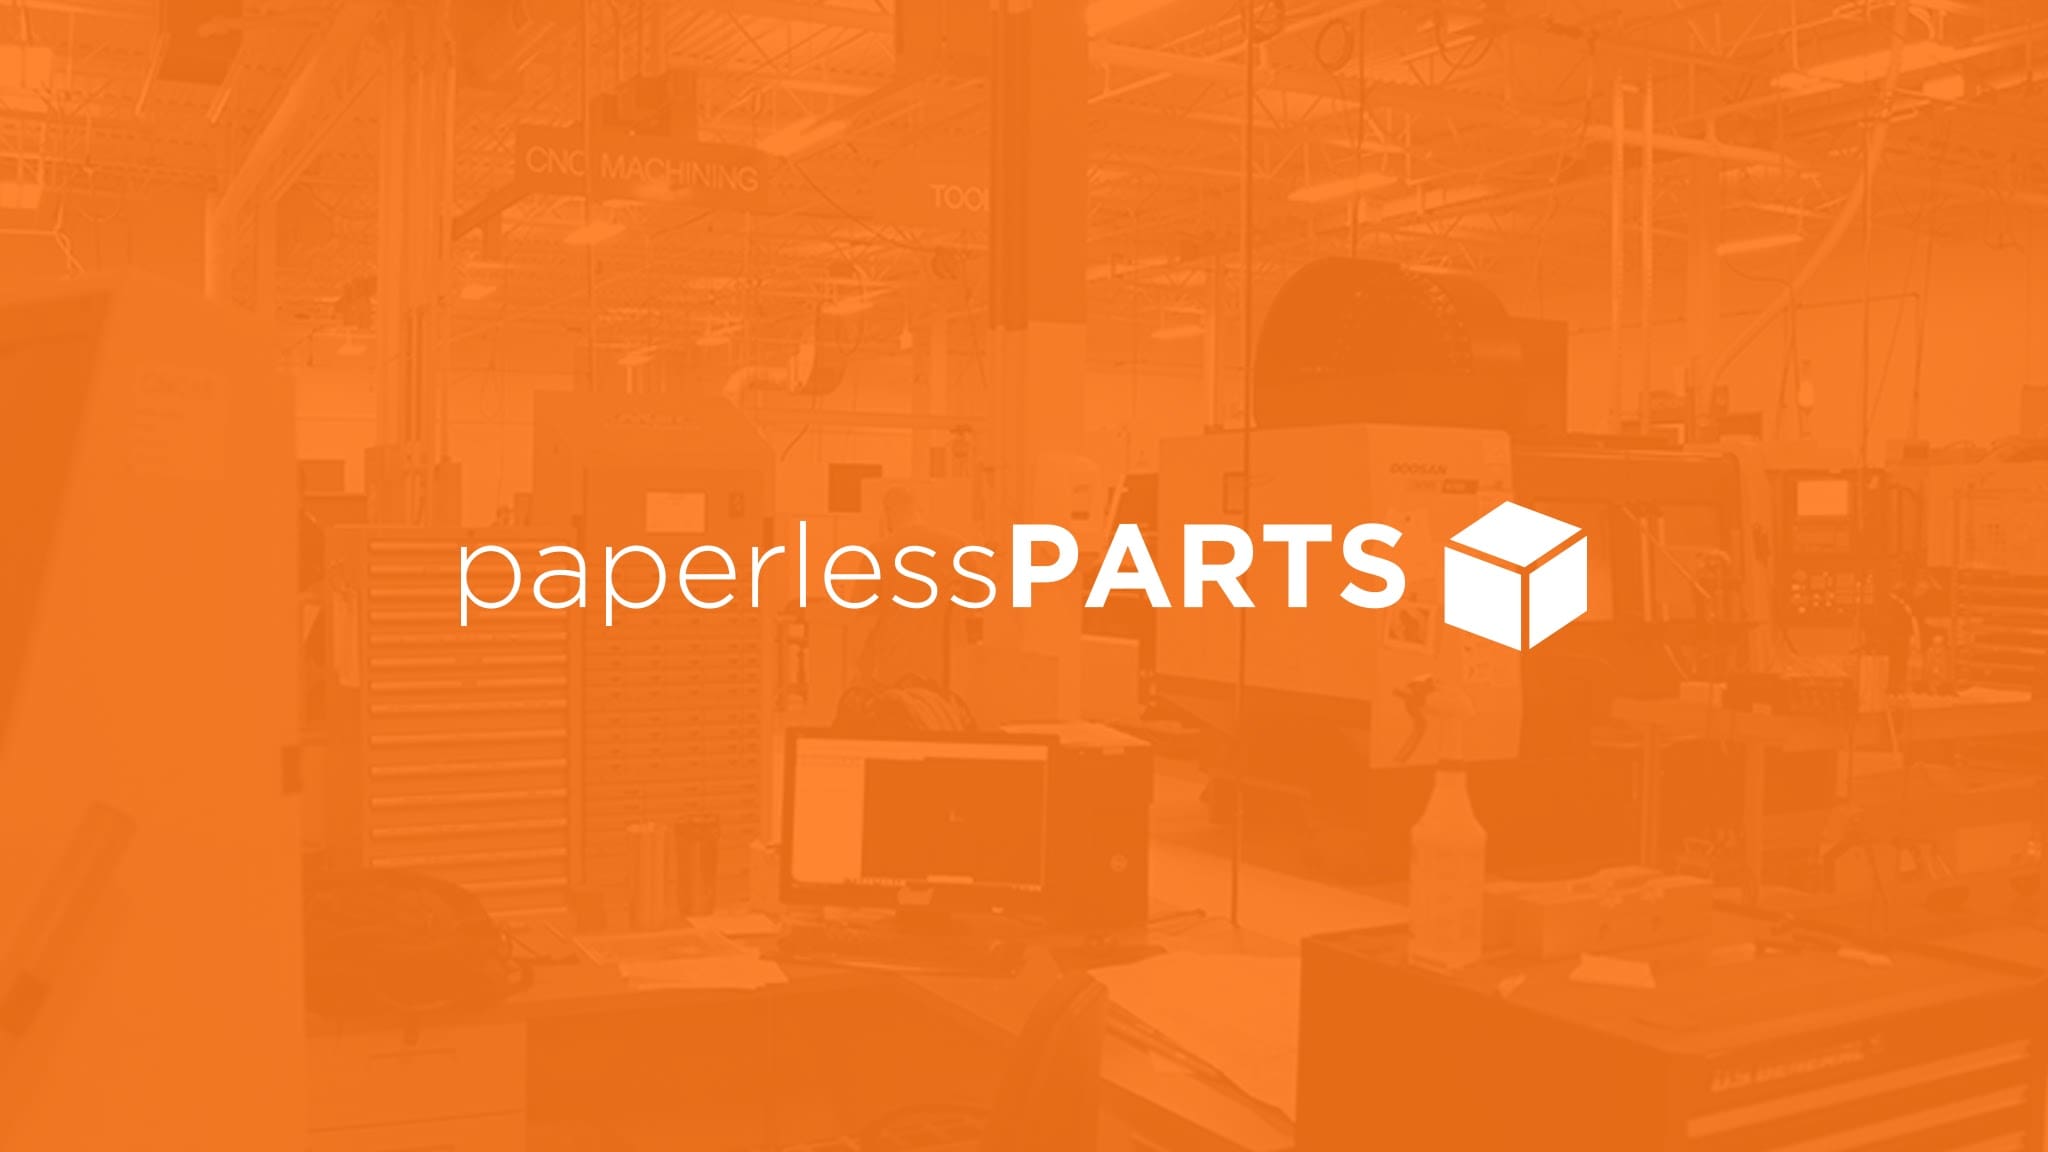 paperless parts competitors